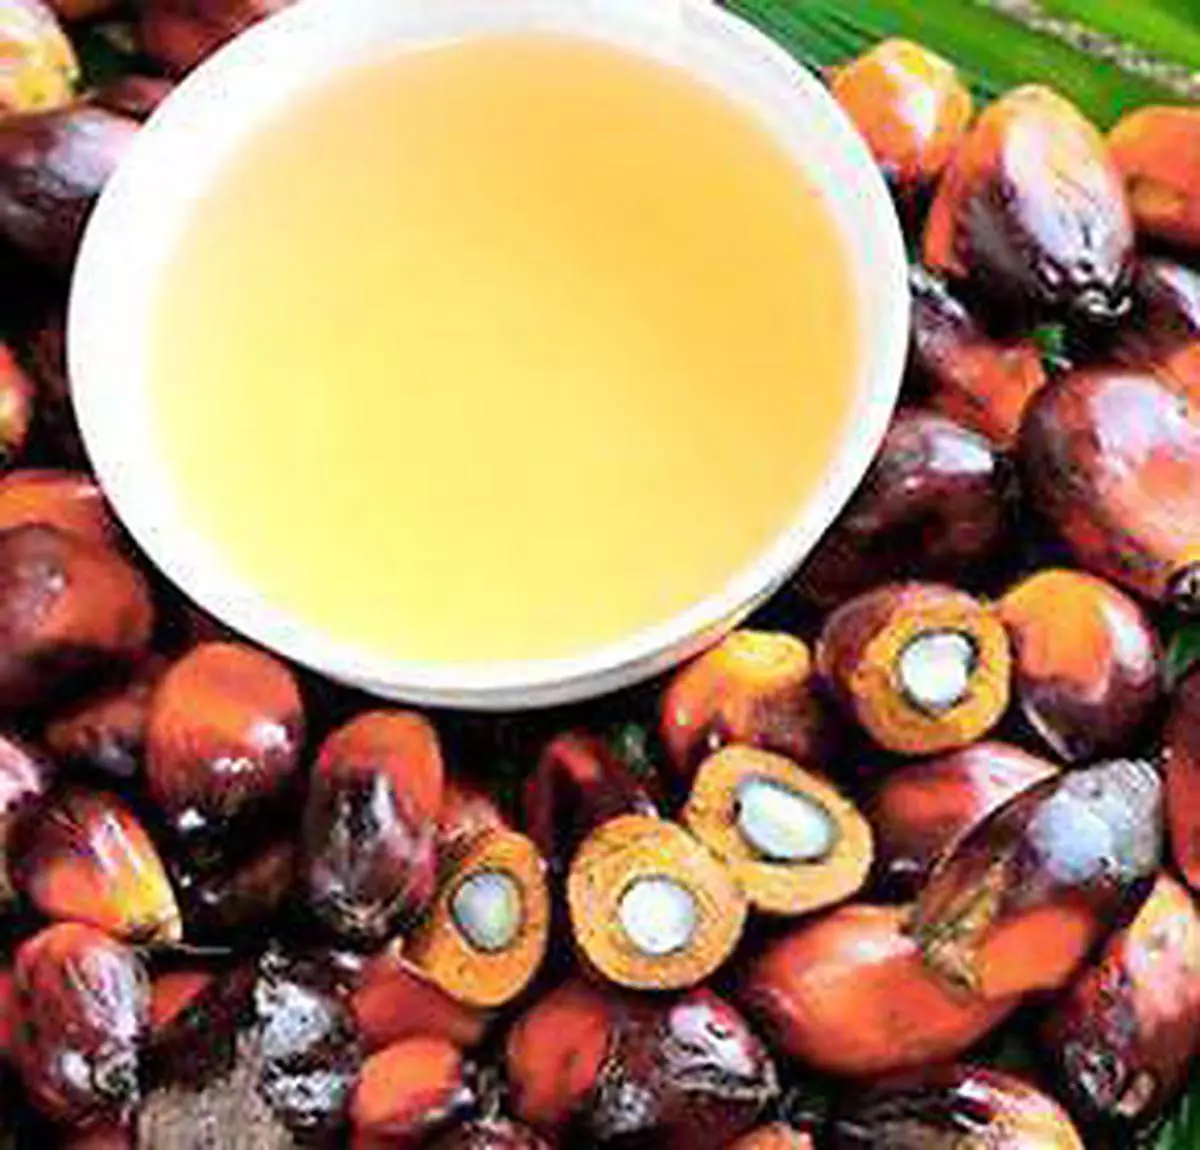 India’s palm oil refining industry is suffering from low capacity utilisation due to excessive import of RBD palmolein (file image)